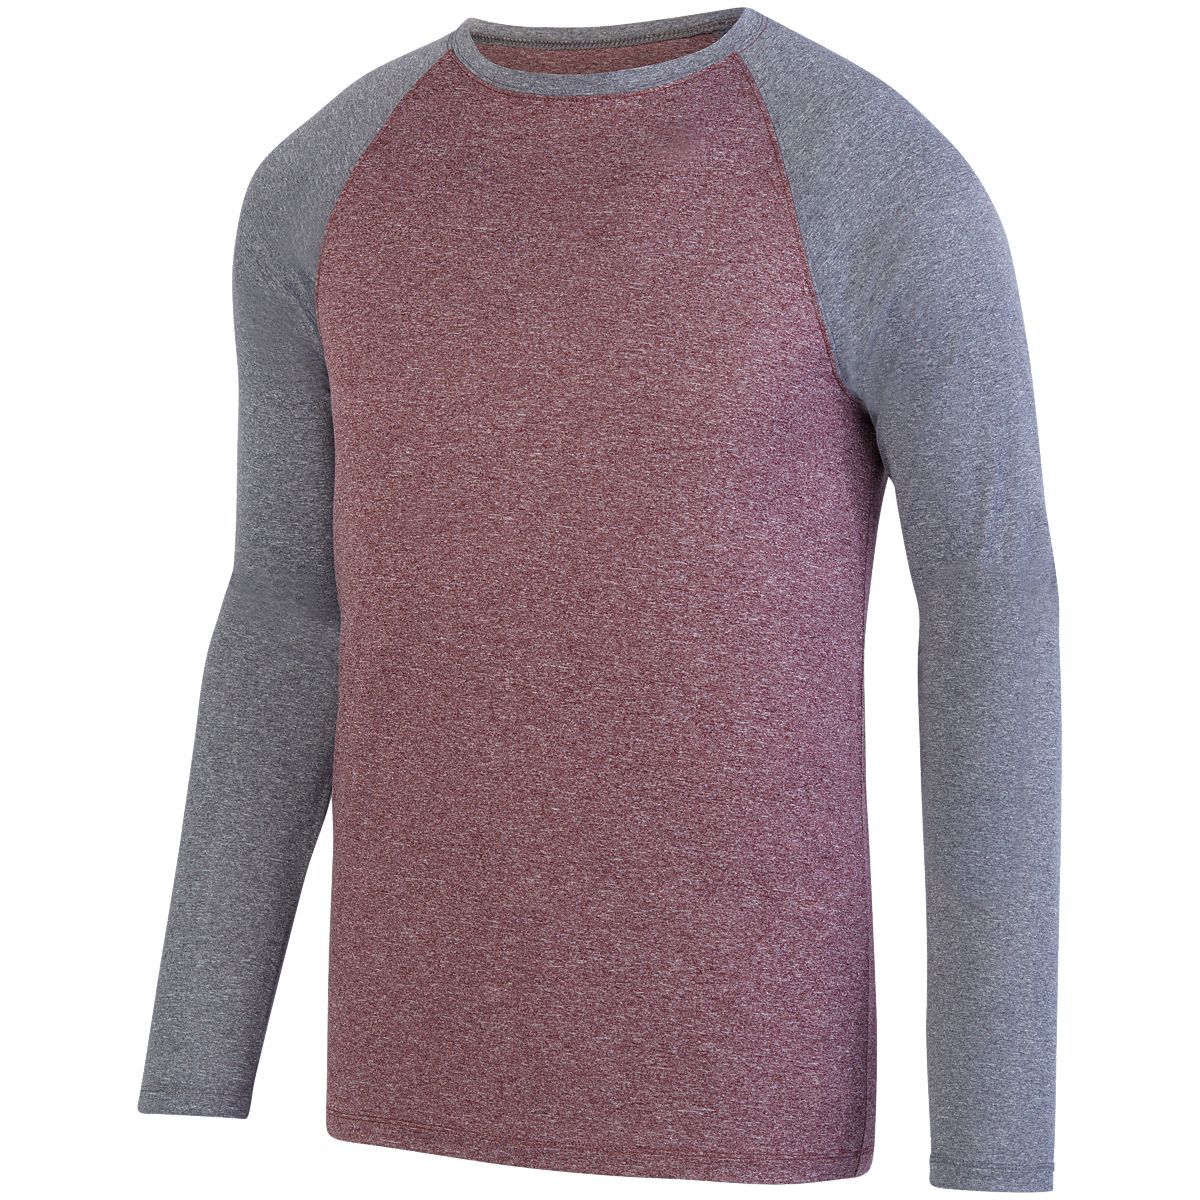 Augusta Sportswear Kinergy Two Color Long Sleeve Raglan Tee in Maroon Heather/Graphite Heather  -Part of the Adult, Adult-Tee-Shirt, T-Shirts, Augusta-Products, Shirts product lines at KanaleyCreations.com